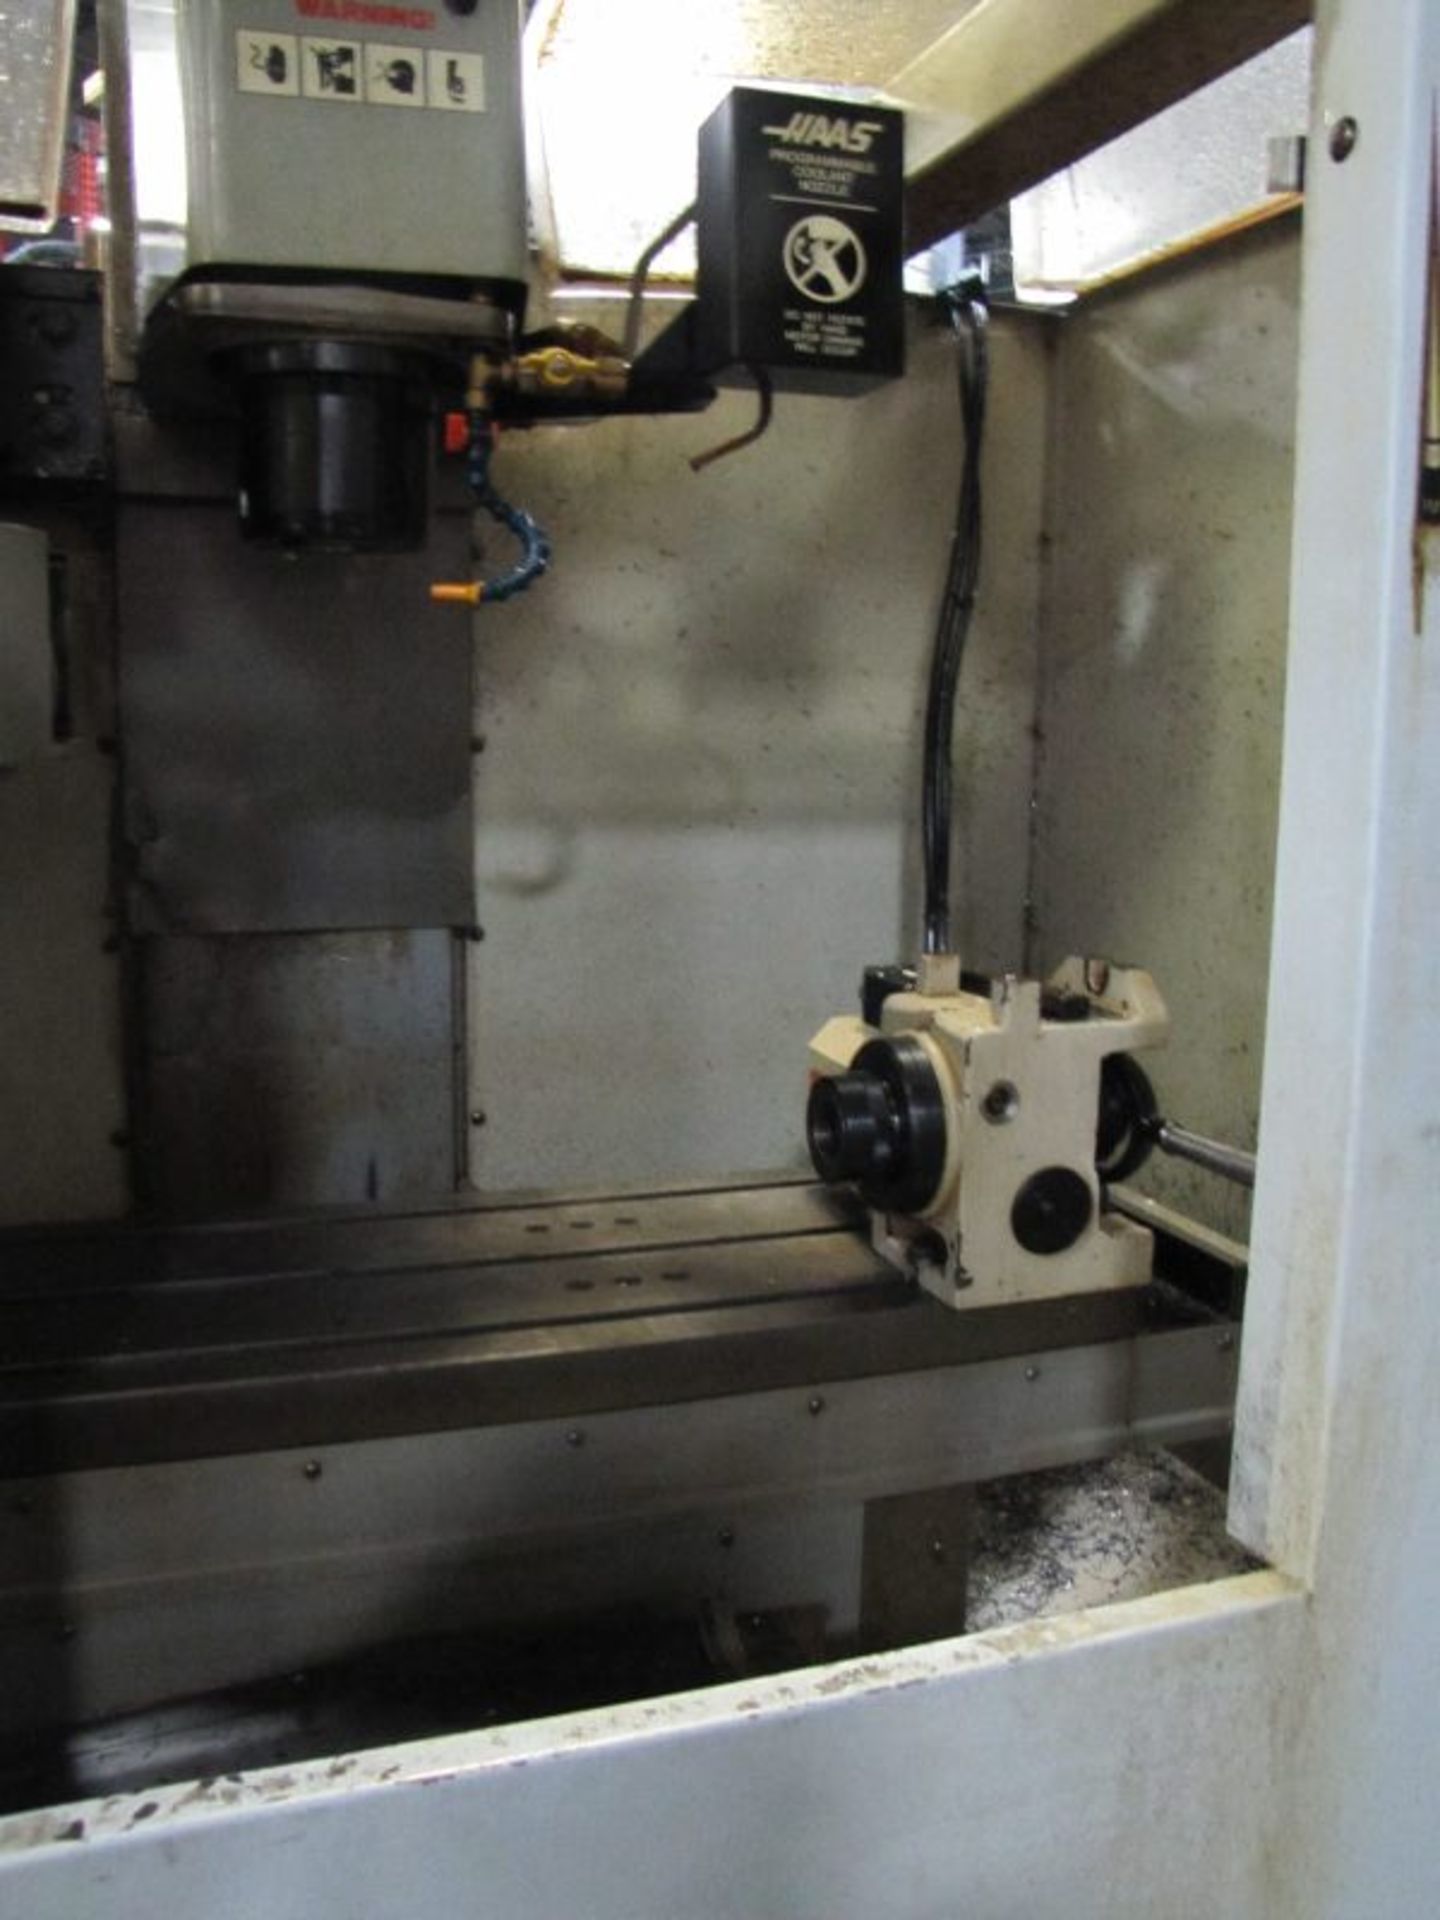 HAAS Super Mini Mill Vertical CNC Mill, S/N: 30363 Mfg. 12/02, HAAS CNC Control, Table Size 12” X - Image 2 of 9